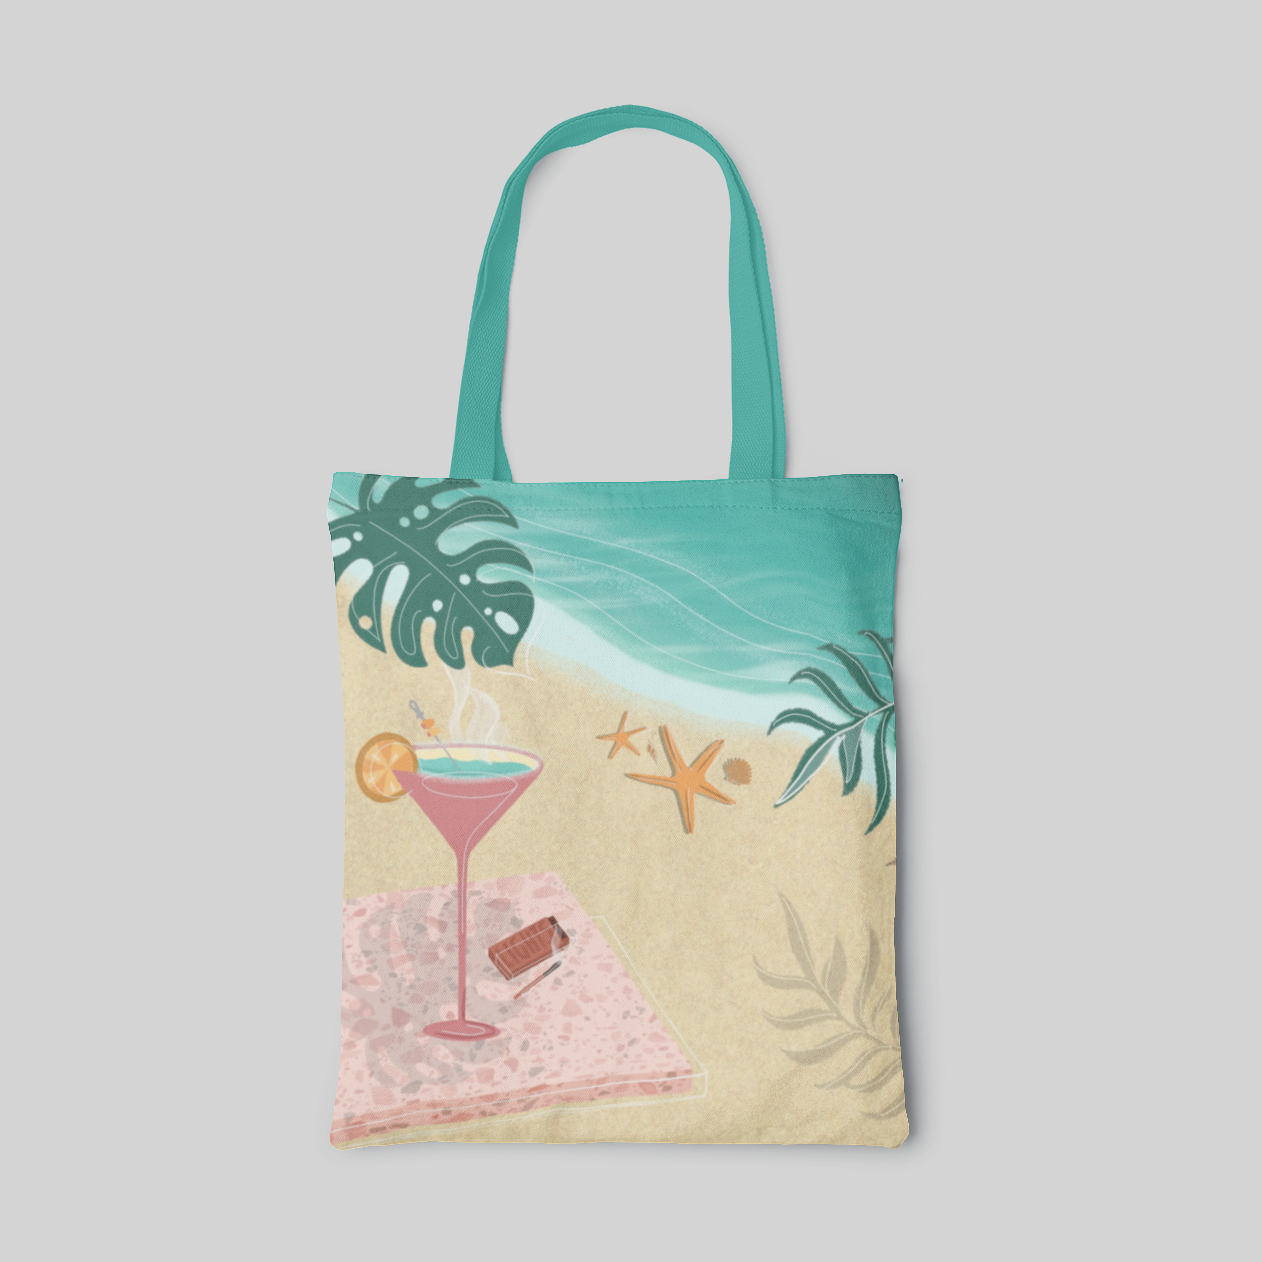 nature design tote bag with beach illustration print, martini glass and a burning match on a pink mat, front side